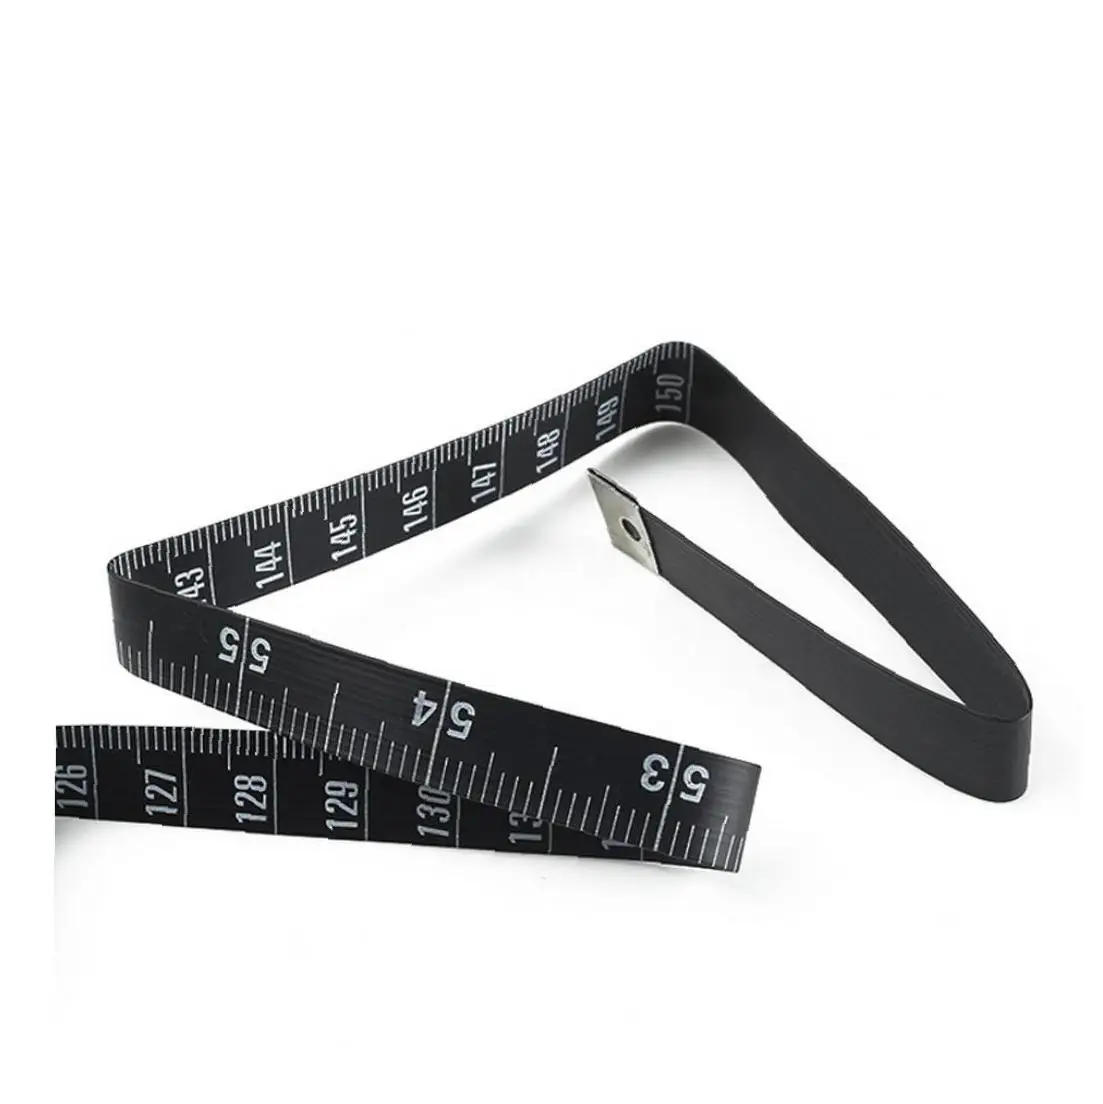 1 Pc Seamstress Tailor Ruler Soft Tape Measure Sewing Measuring Tape for Sewing Tailor Measurement Tape Sewing Accessories Black 60 Inch